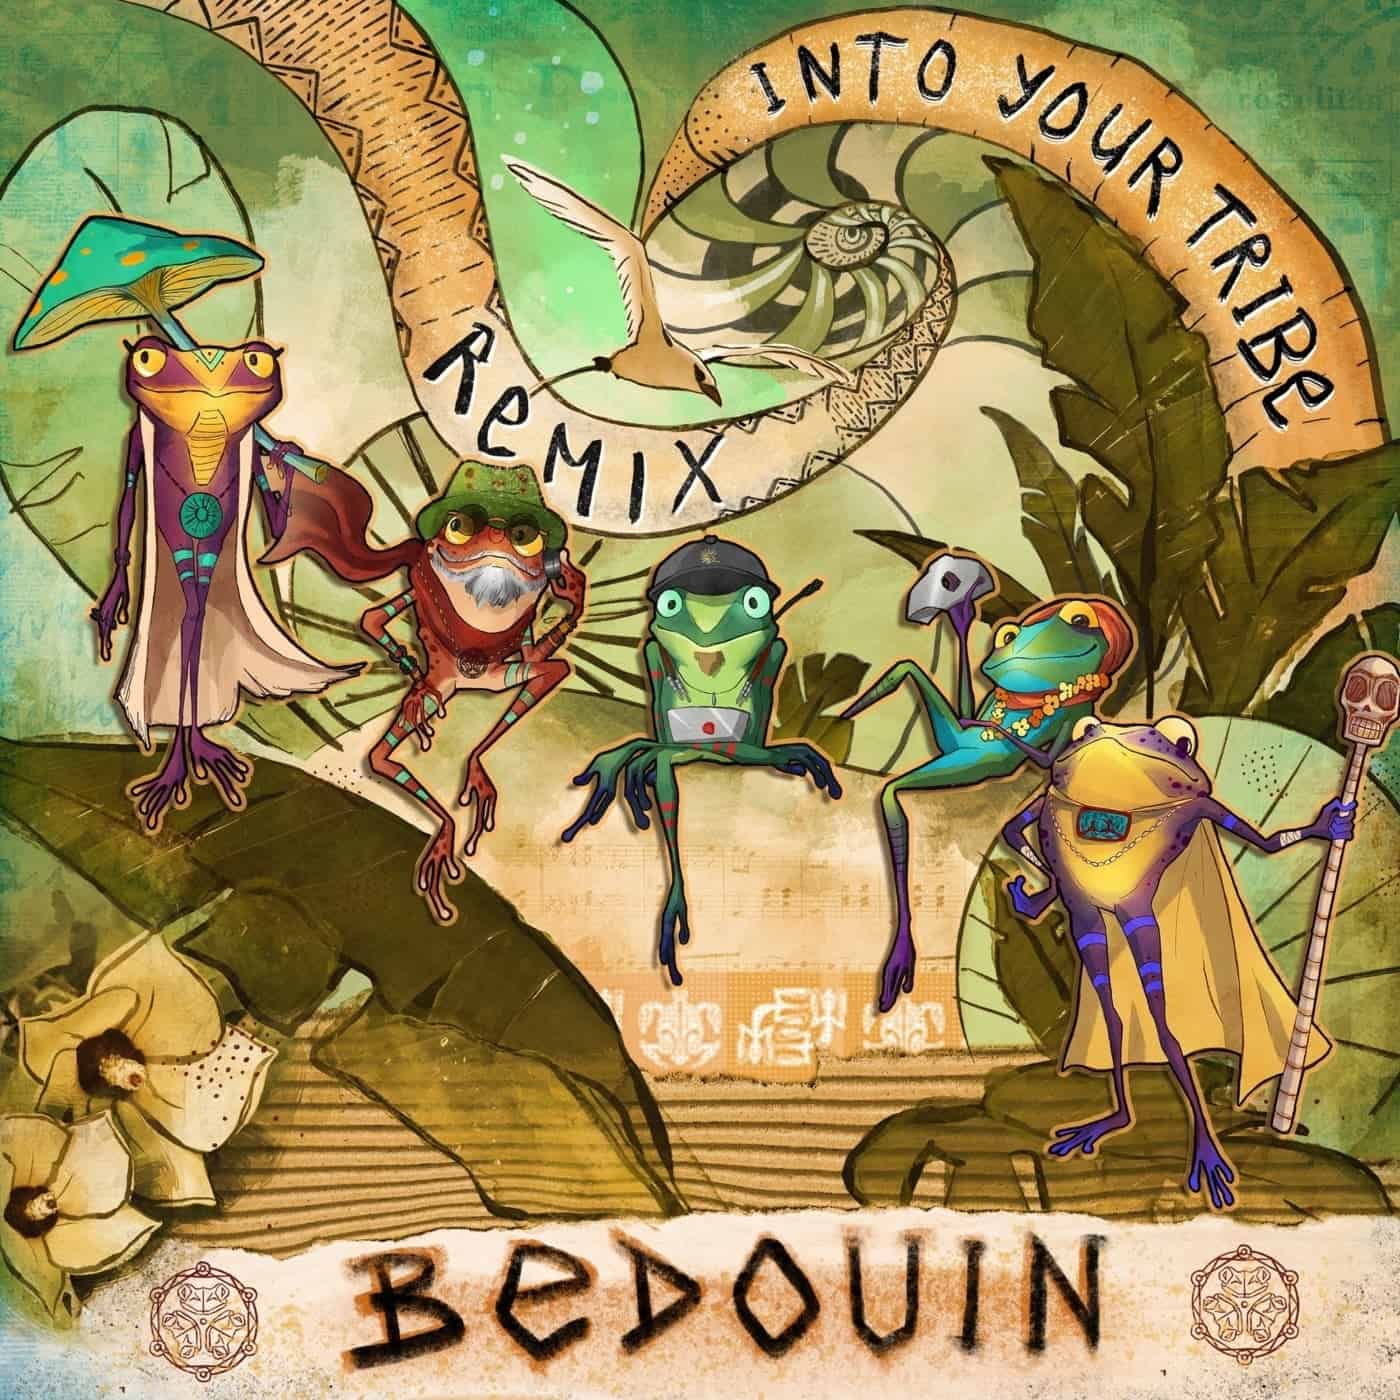 Download Into Your Tribe (Bedouin Remix) on Electrobuzz